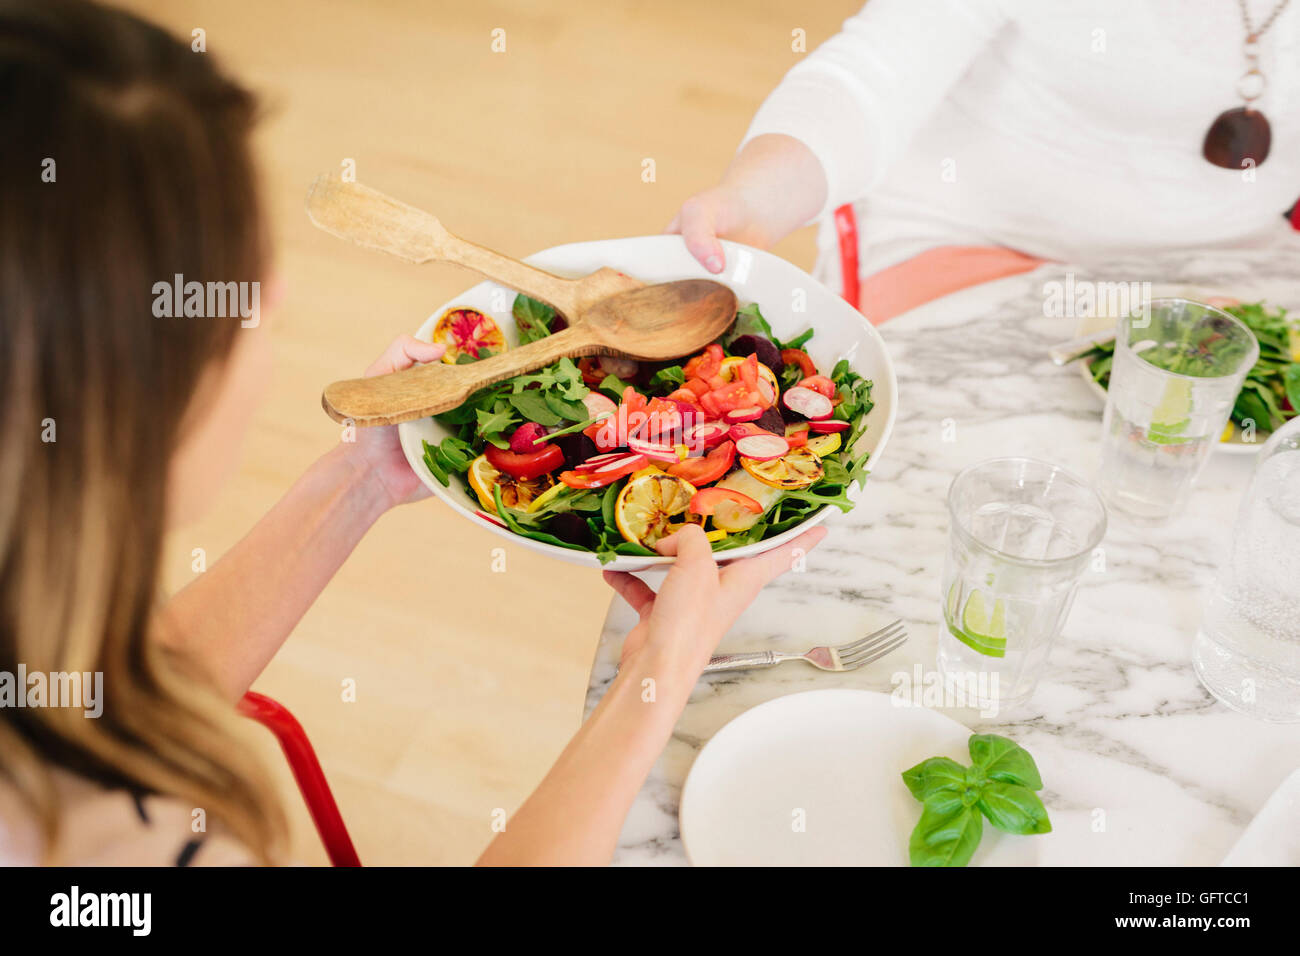 View from above of a table laid with cutlery and plates of prepared food A woman holding a salad plate Stock Photo